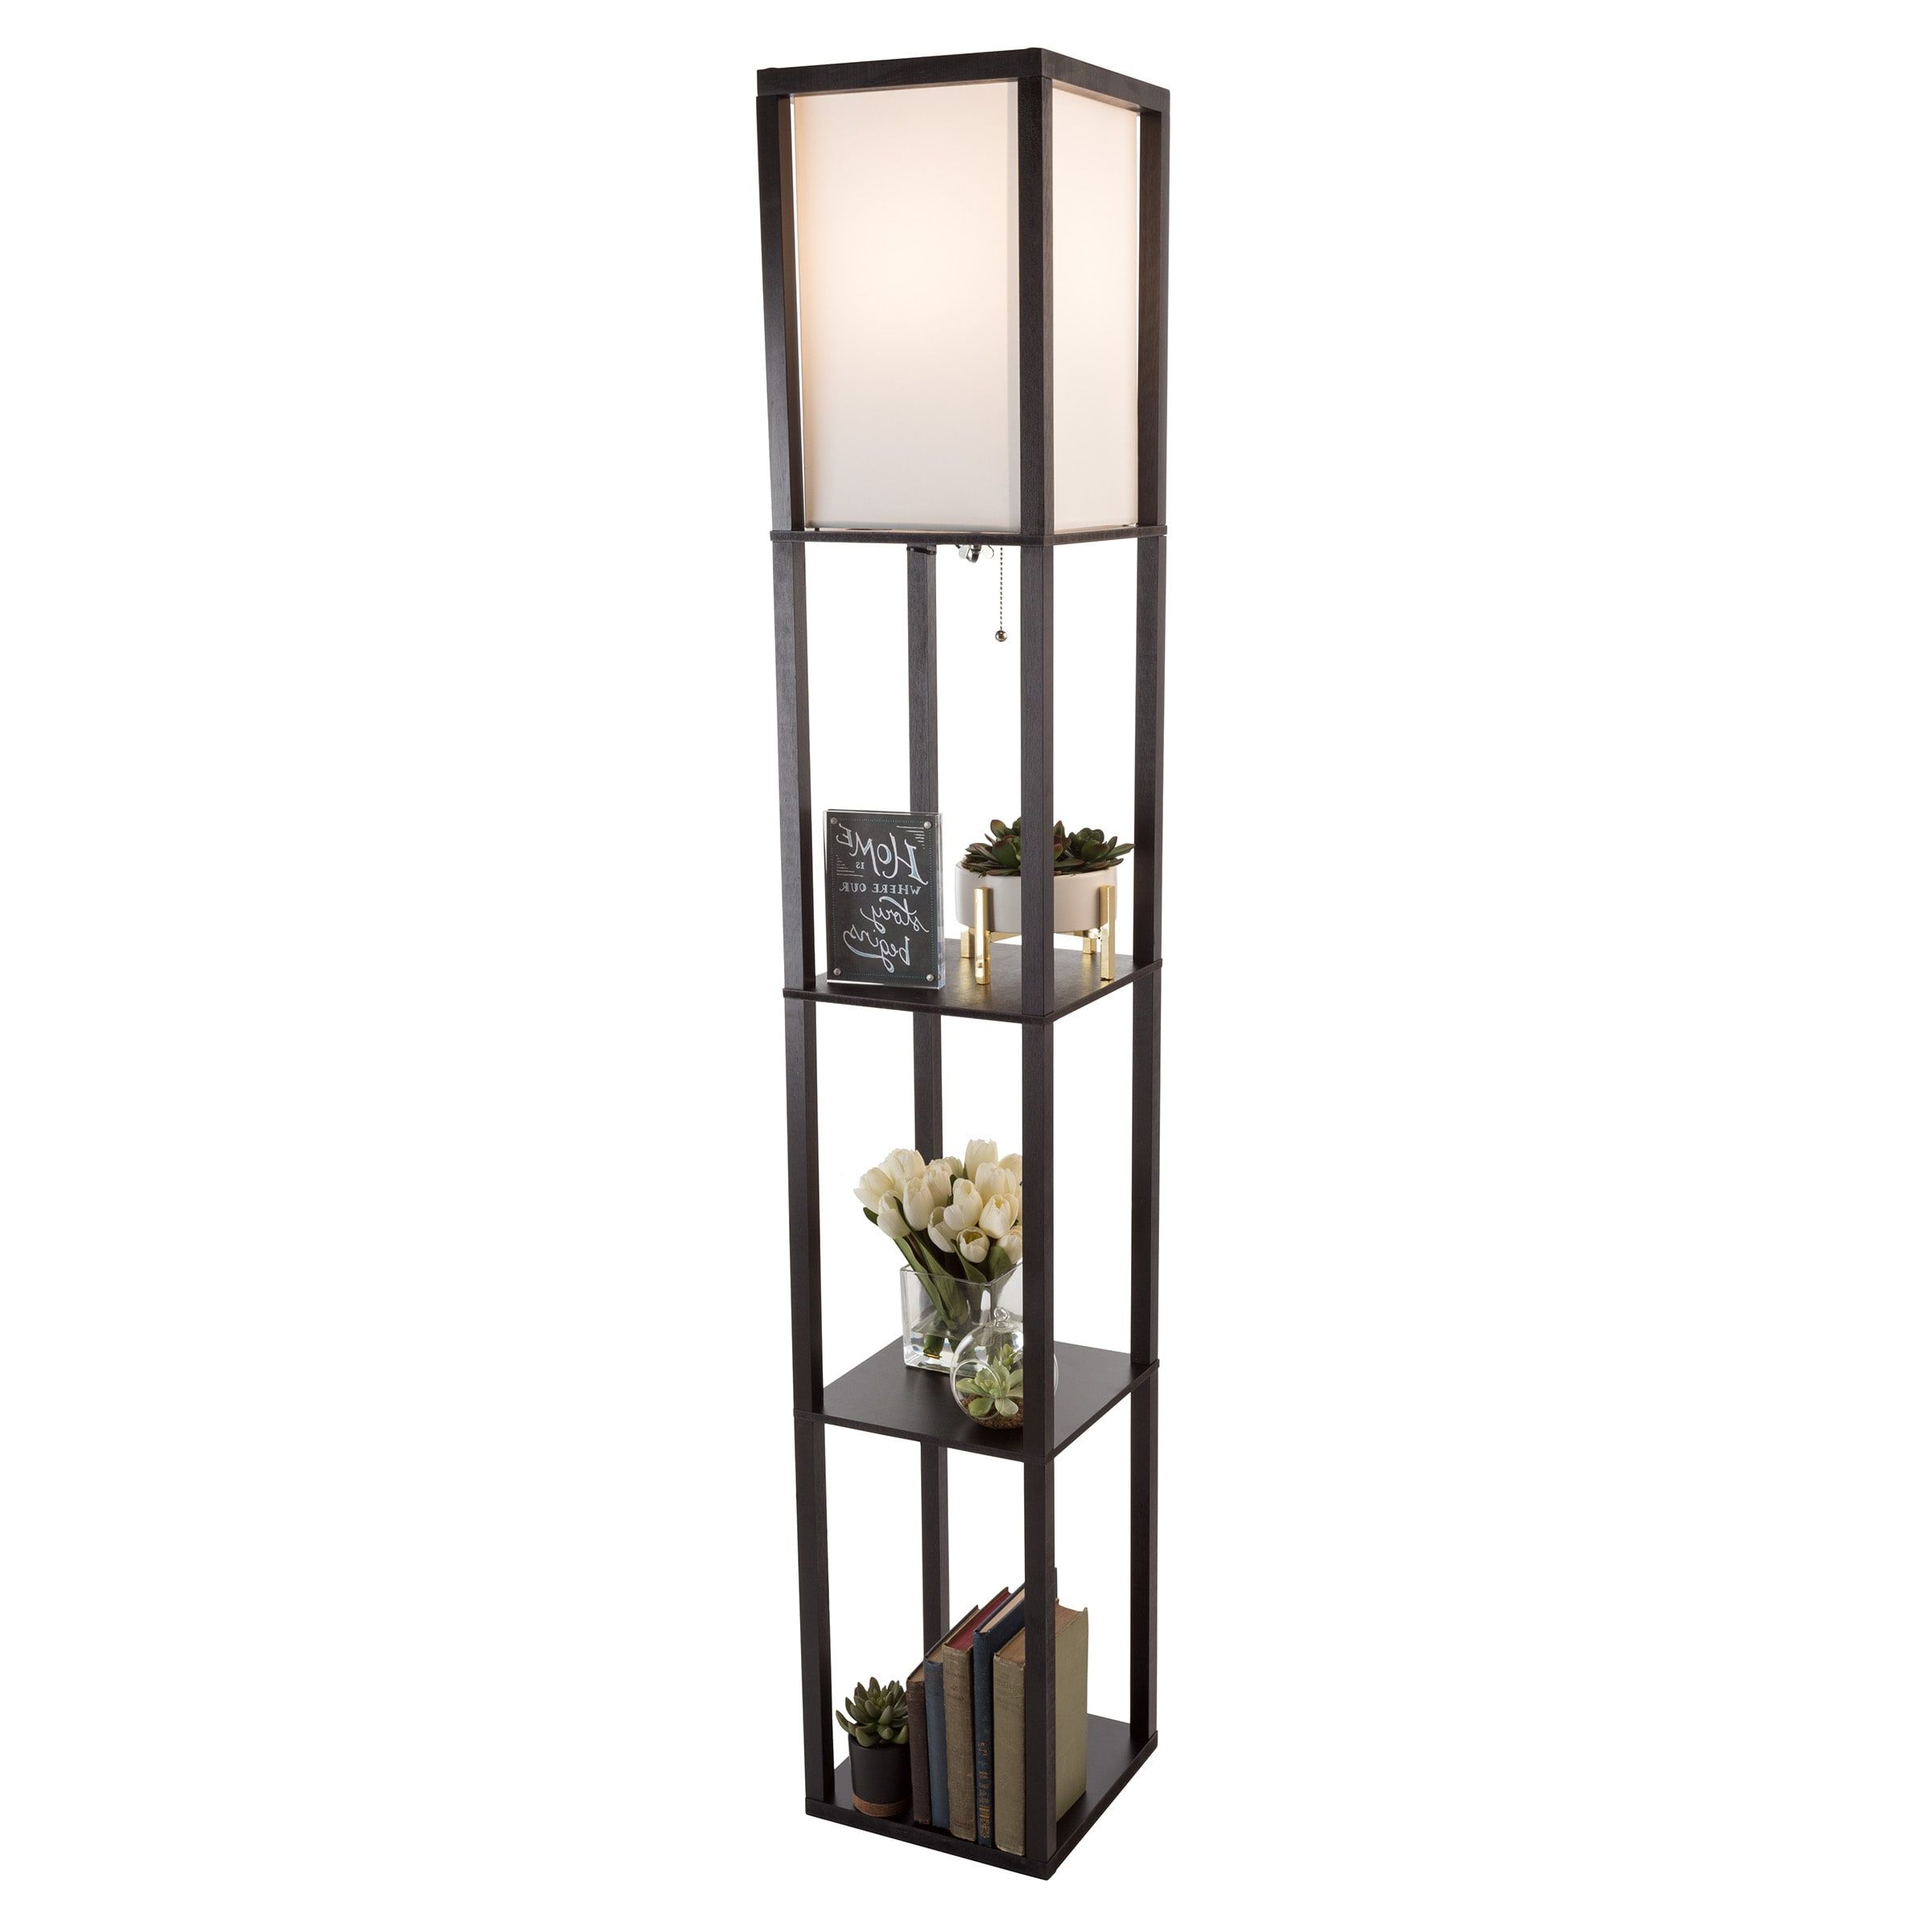 Fashionable 3 Tier Floor Lamps Regarding Hastings Home Led Floor Lamp With 3 Shelves, Black  (View 14 of 15)